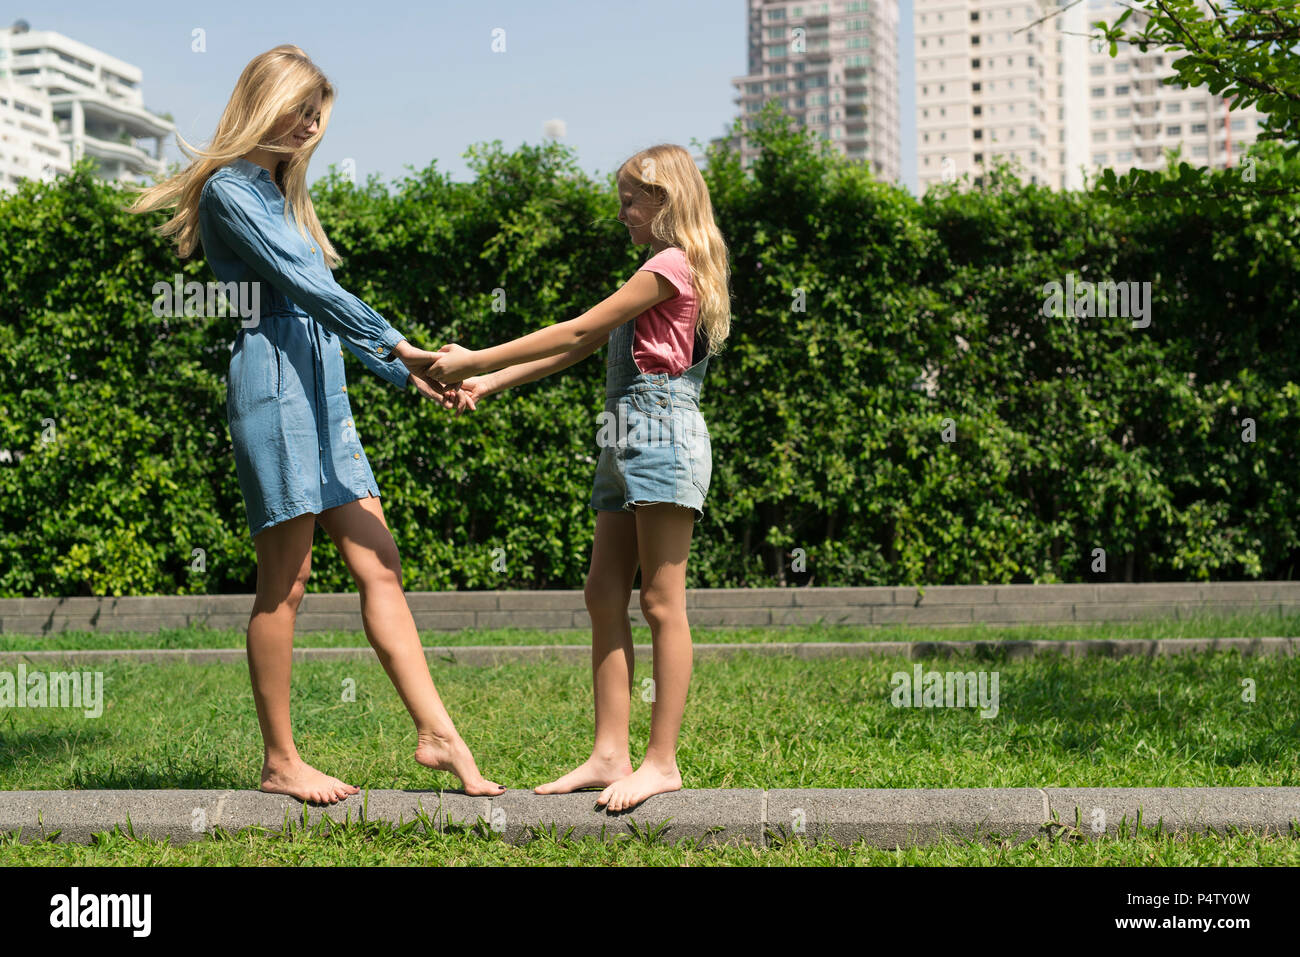 Happy mother and daughter holding hands in urban city garden Stock Photo